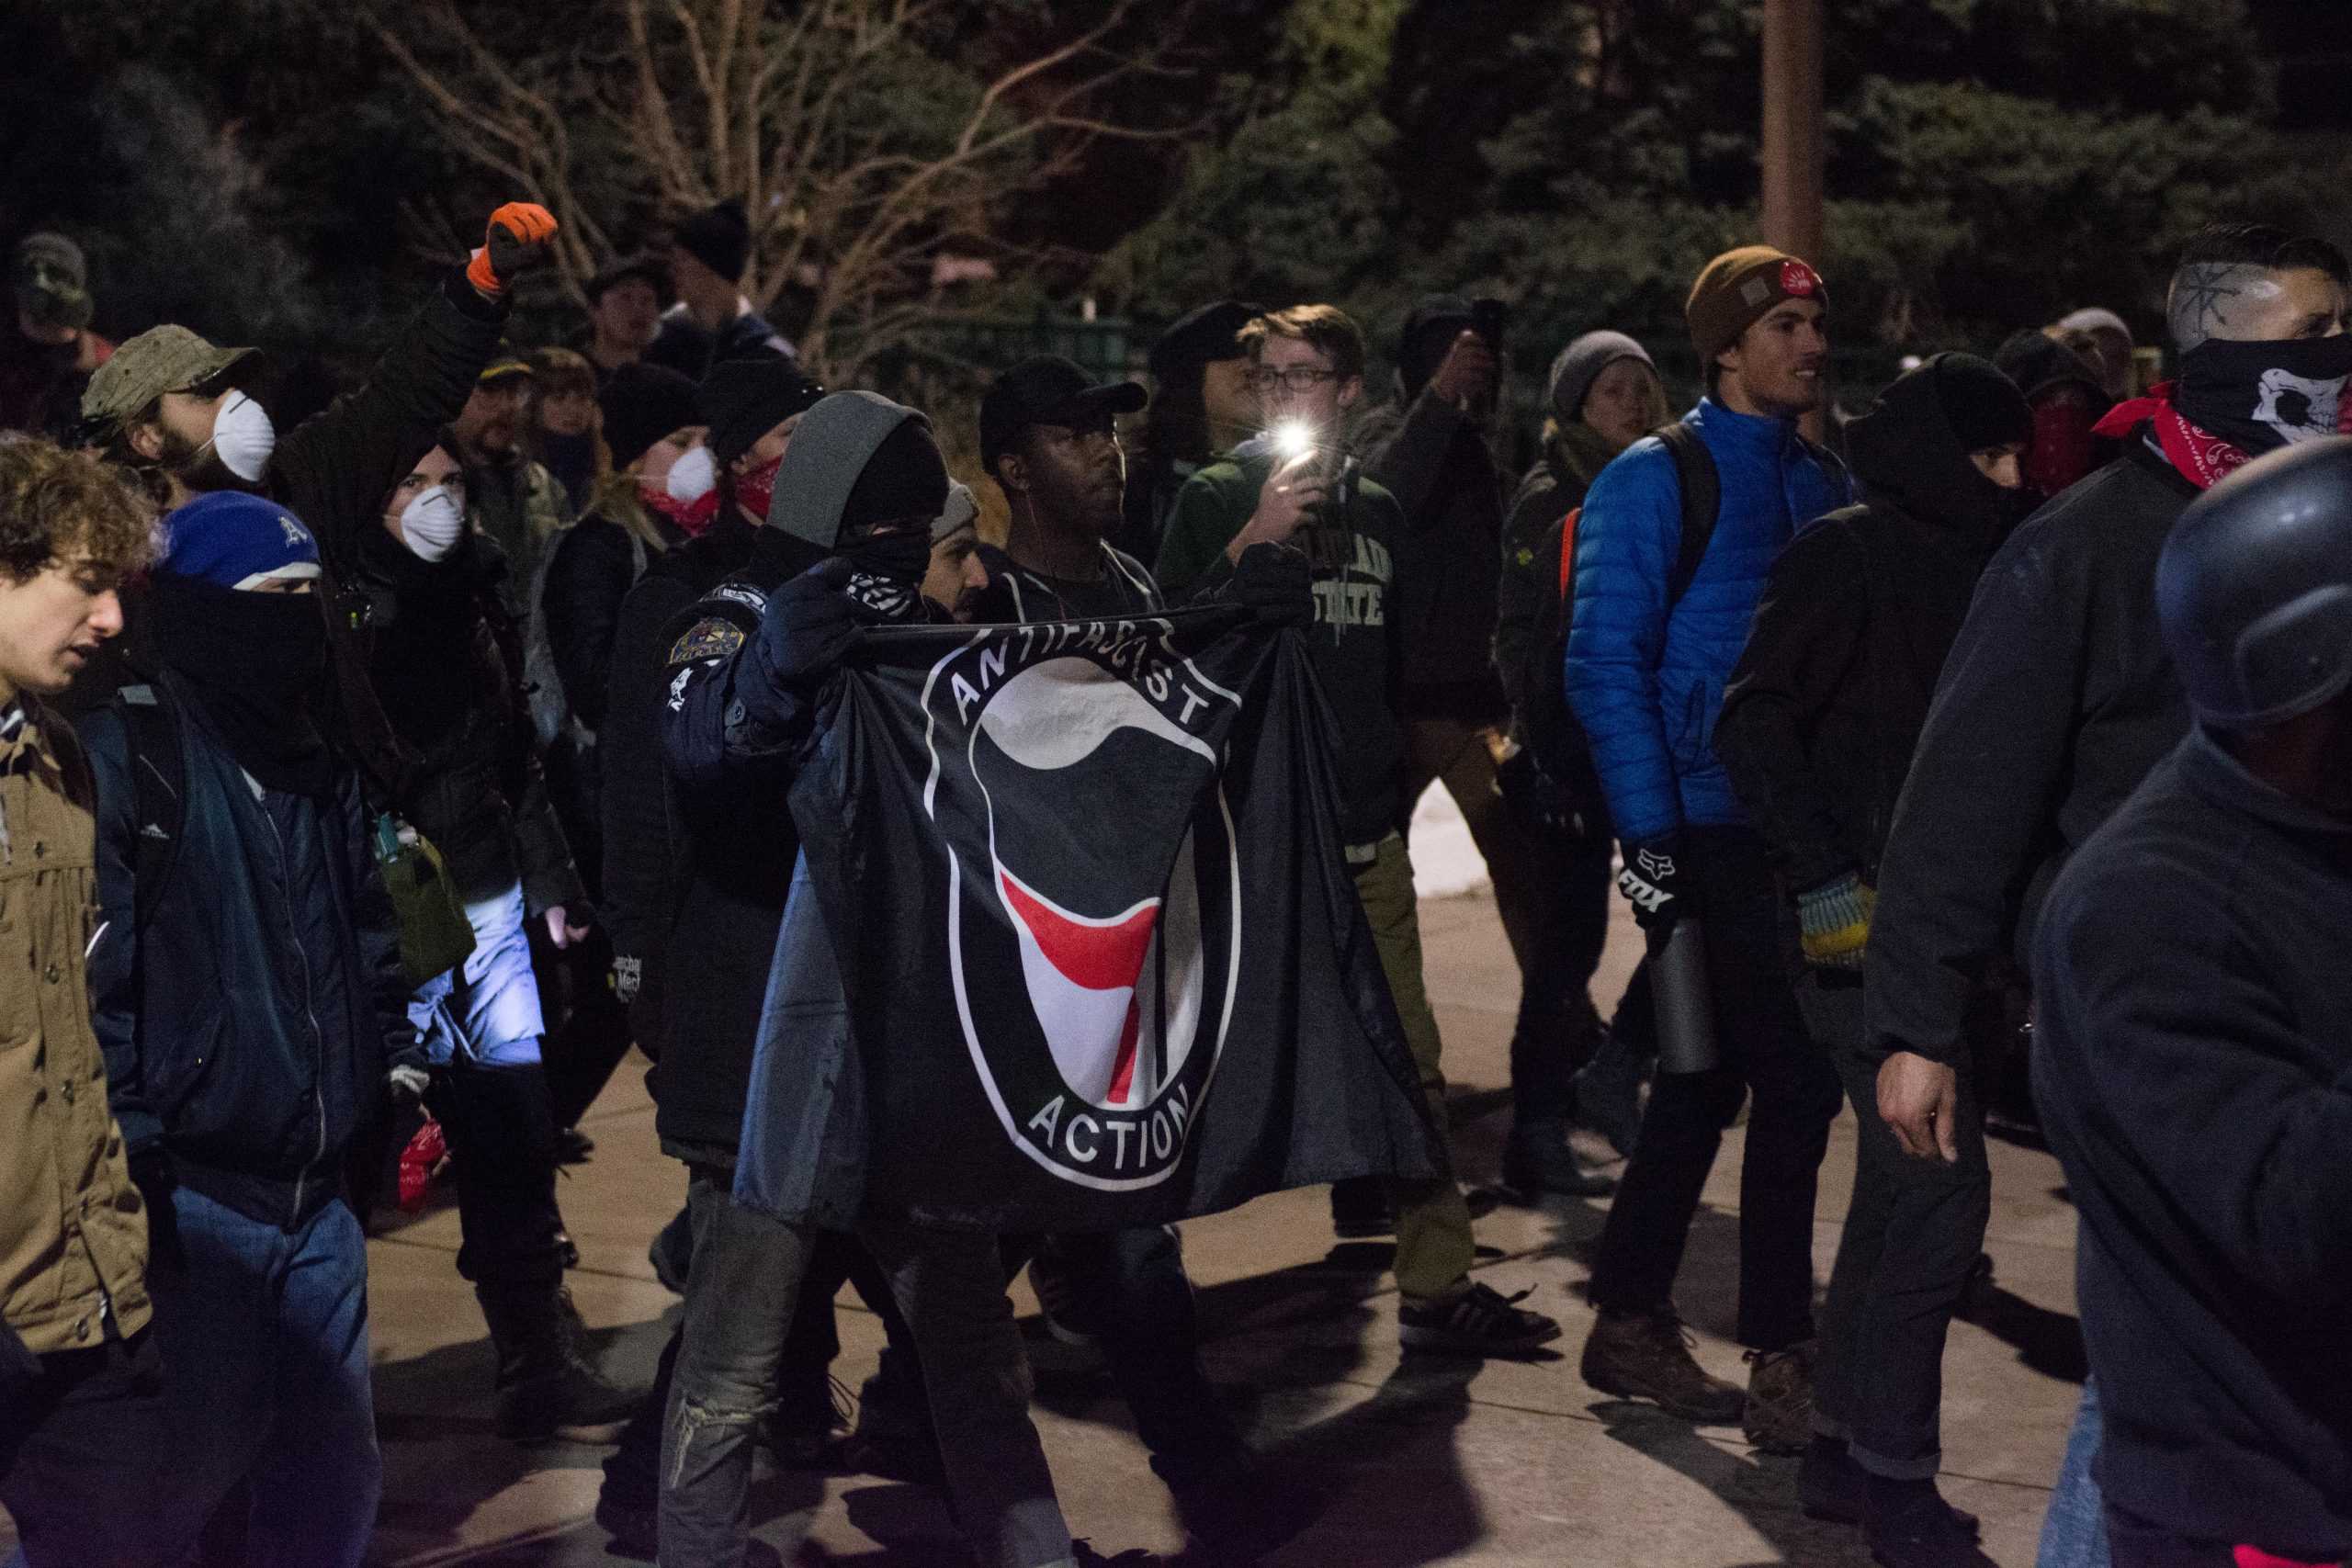 White+nationalists+clashed+with+Antifa+and+other+protesters+and+student+protesters+Friday+after+altercations+started+on+the+Colorado+State+University+Plaza.+